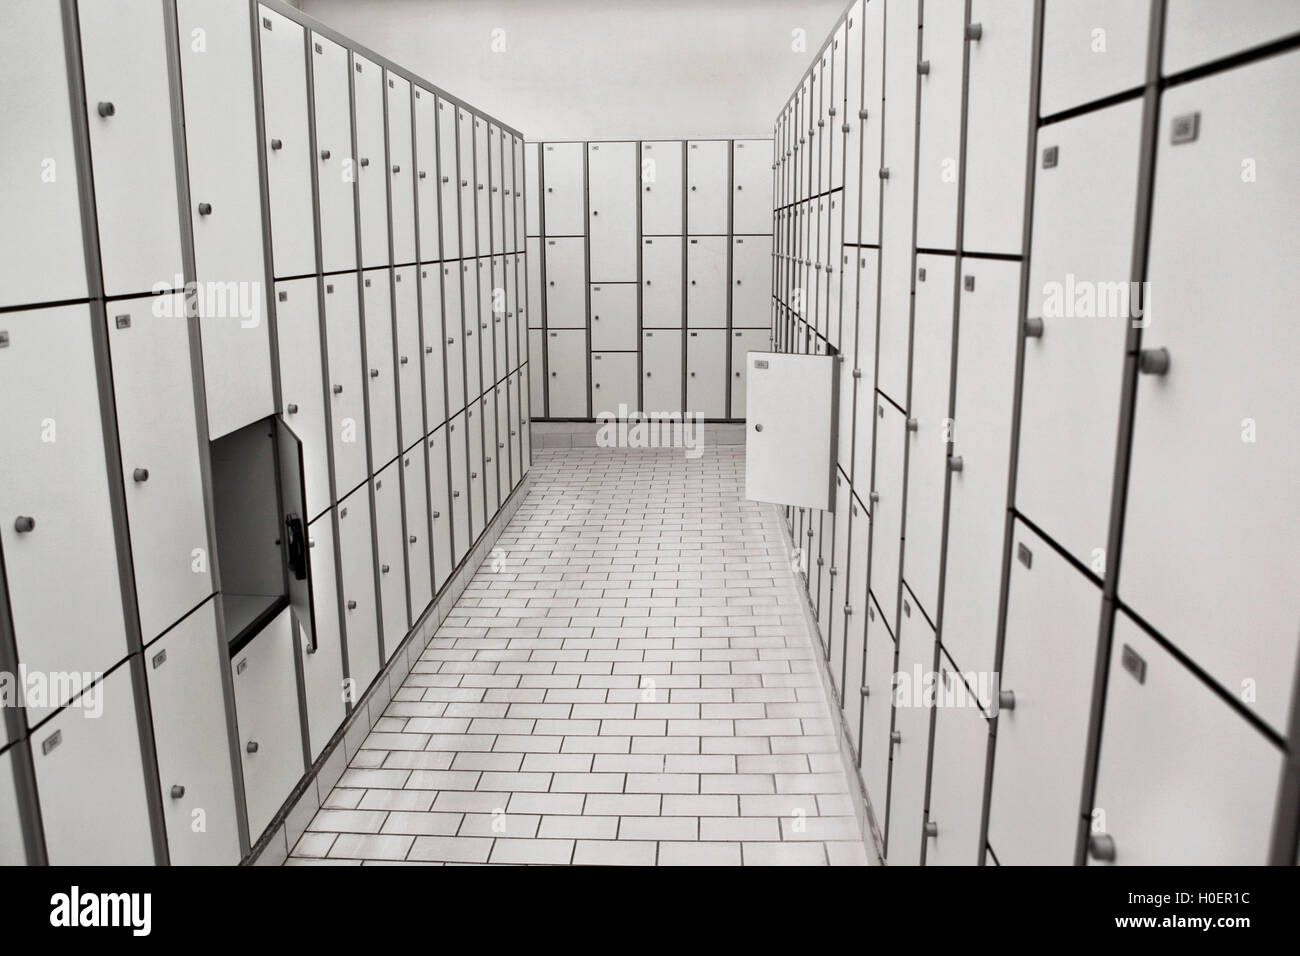 Wardrobes and lockers in the changing room of a swimming pool Stock Photo